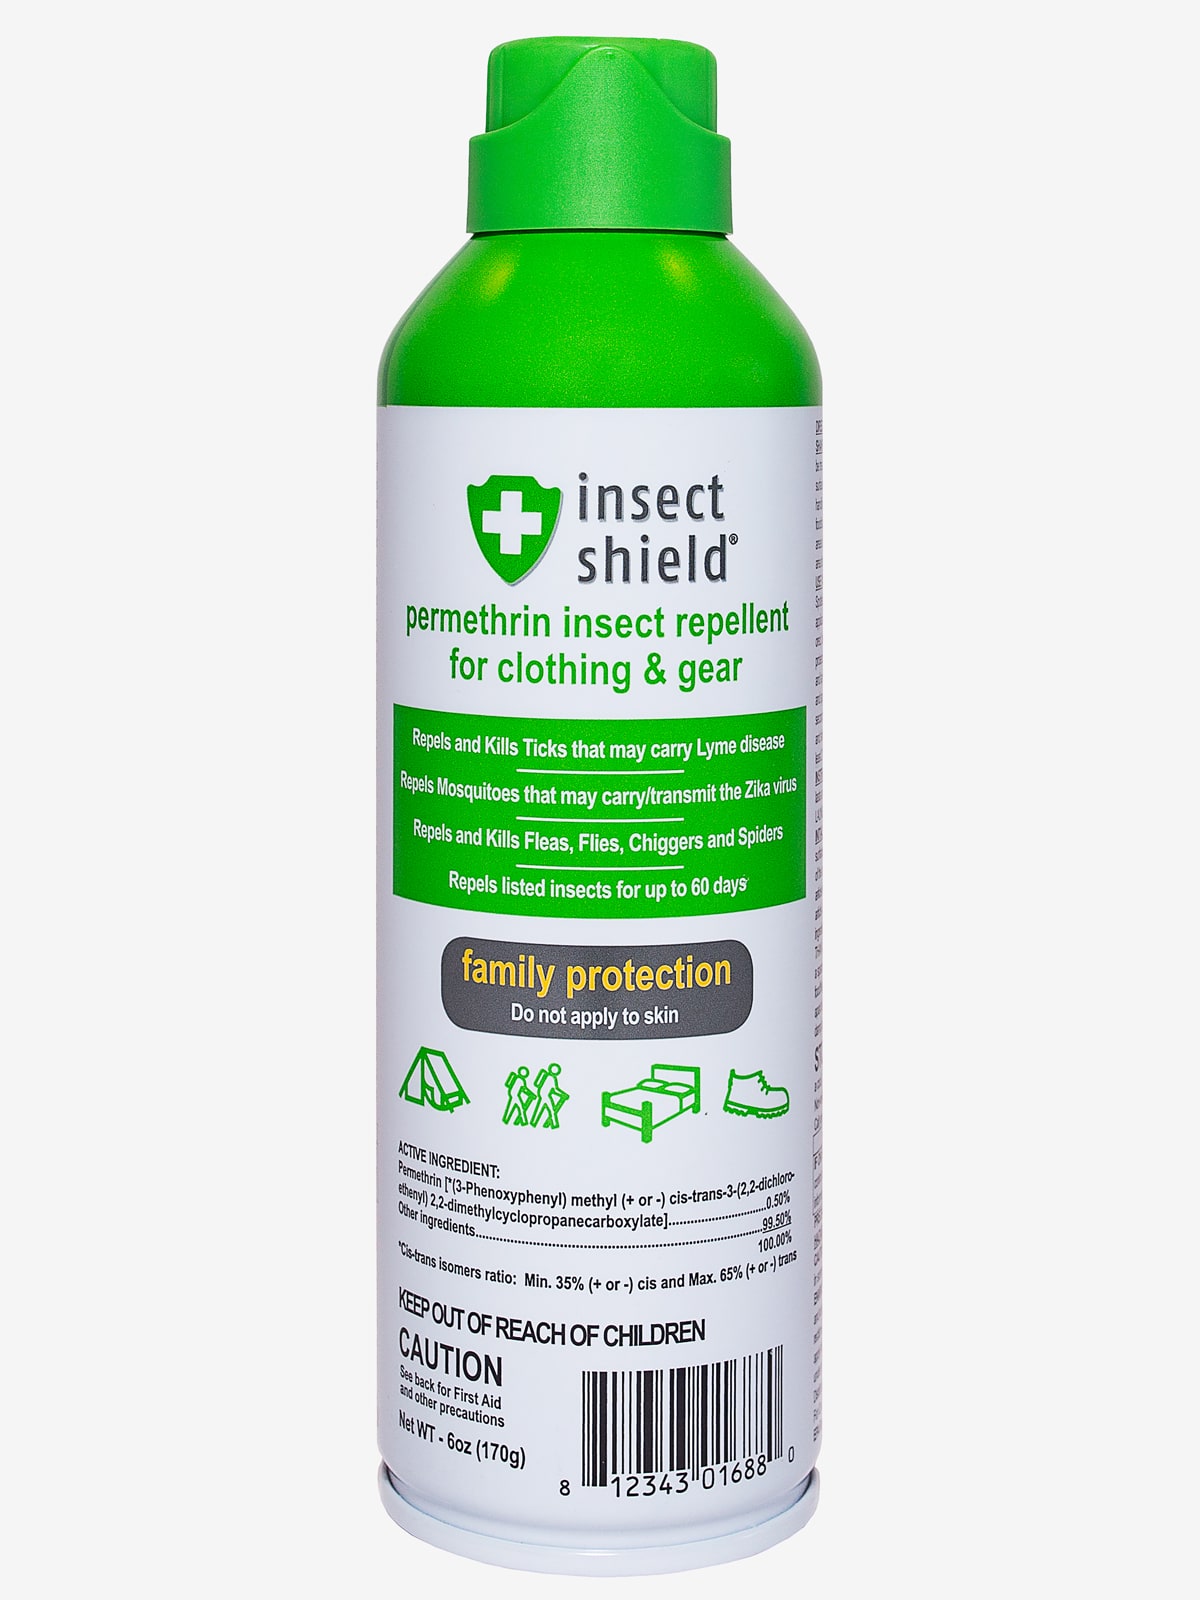 Permethrin Spray for Clothing - Insect Shield